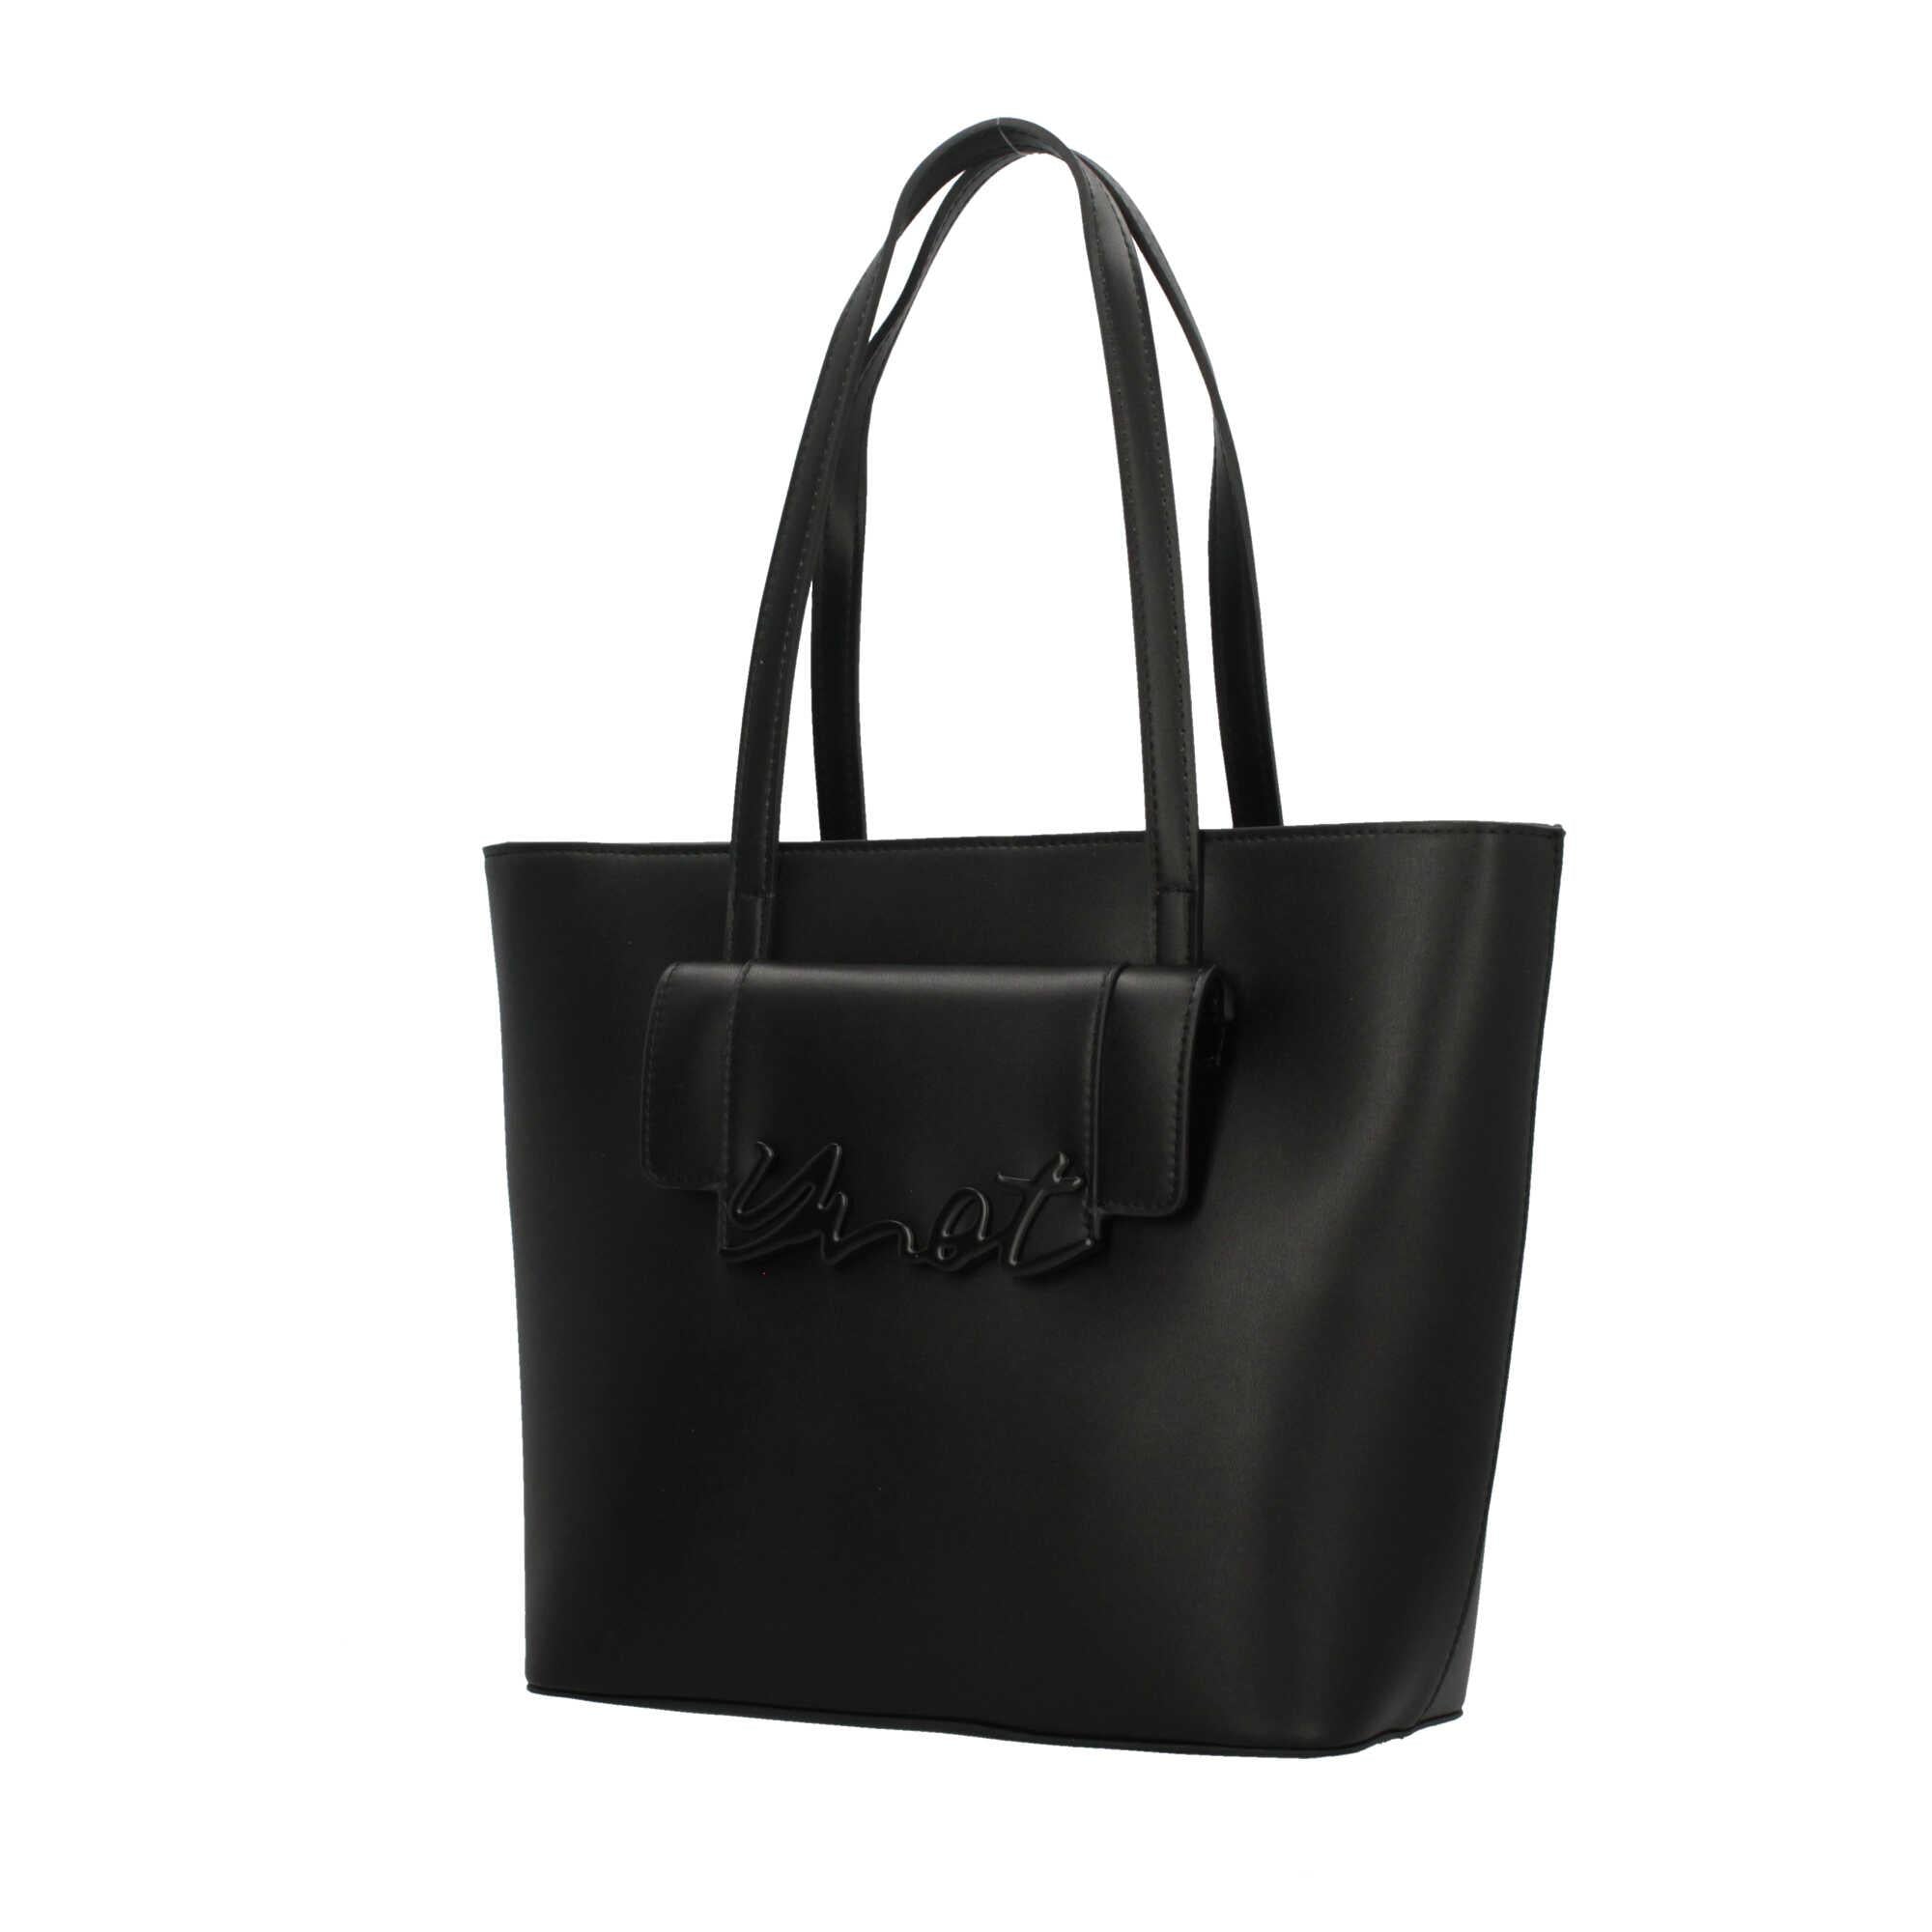 Y Not? Tote Bag Urban Chic in Ecopelle